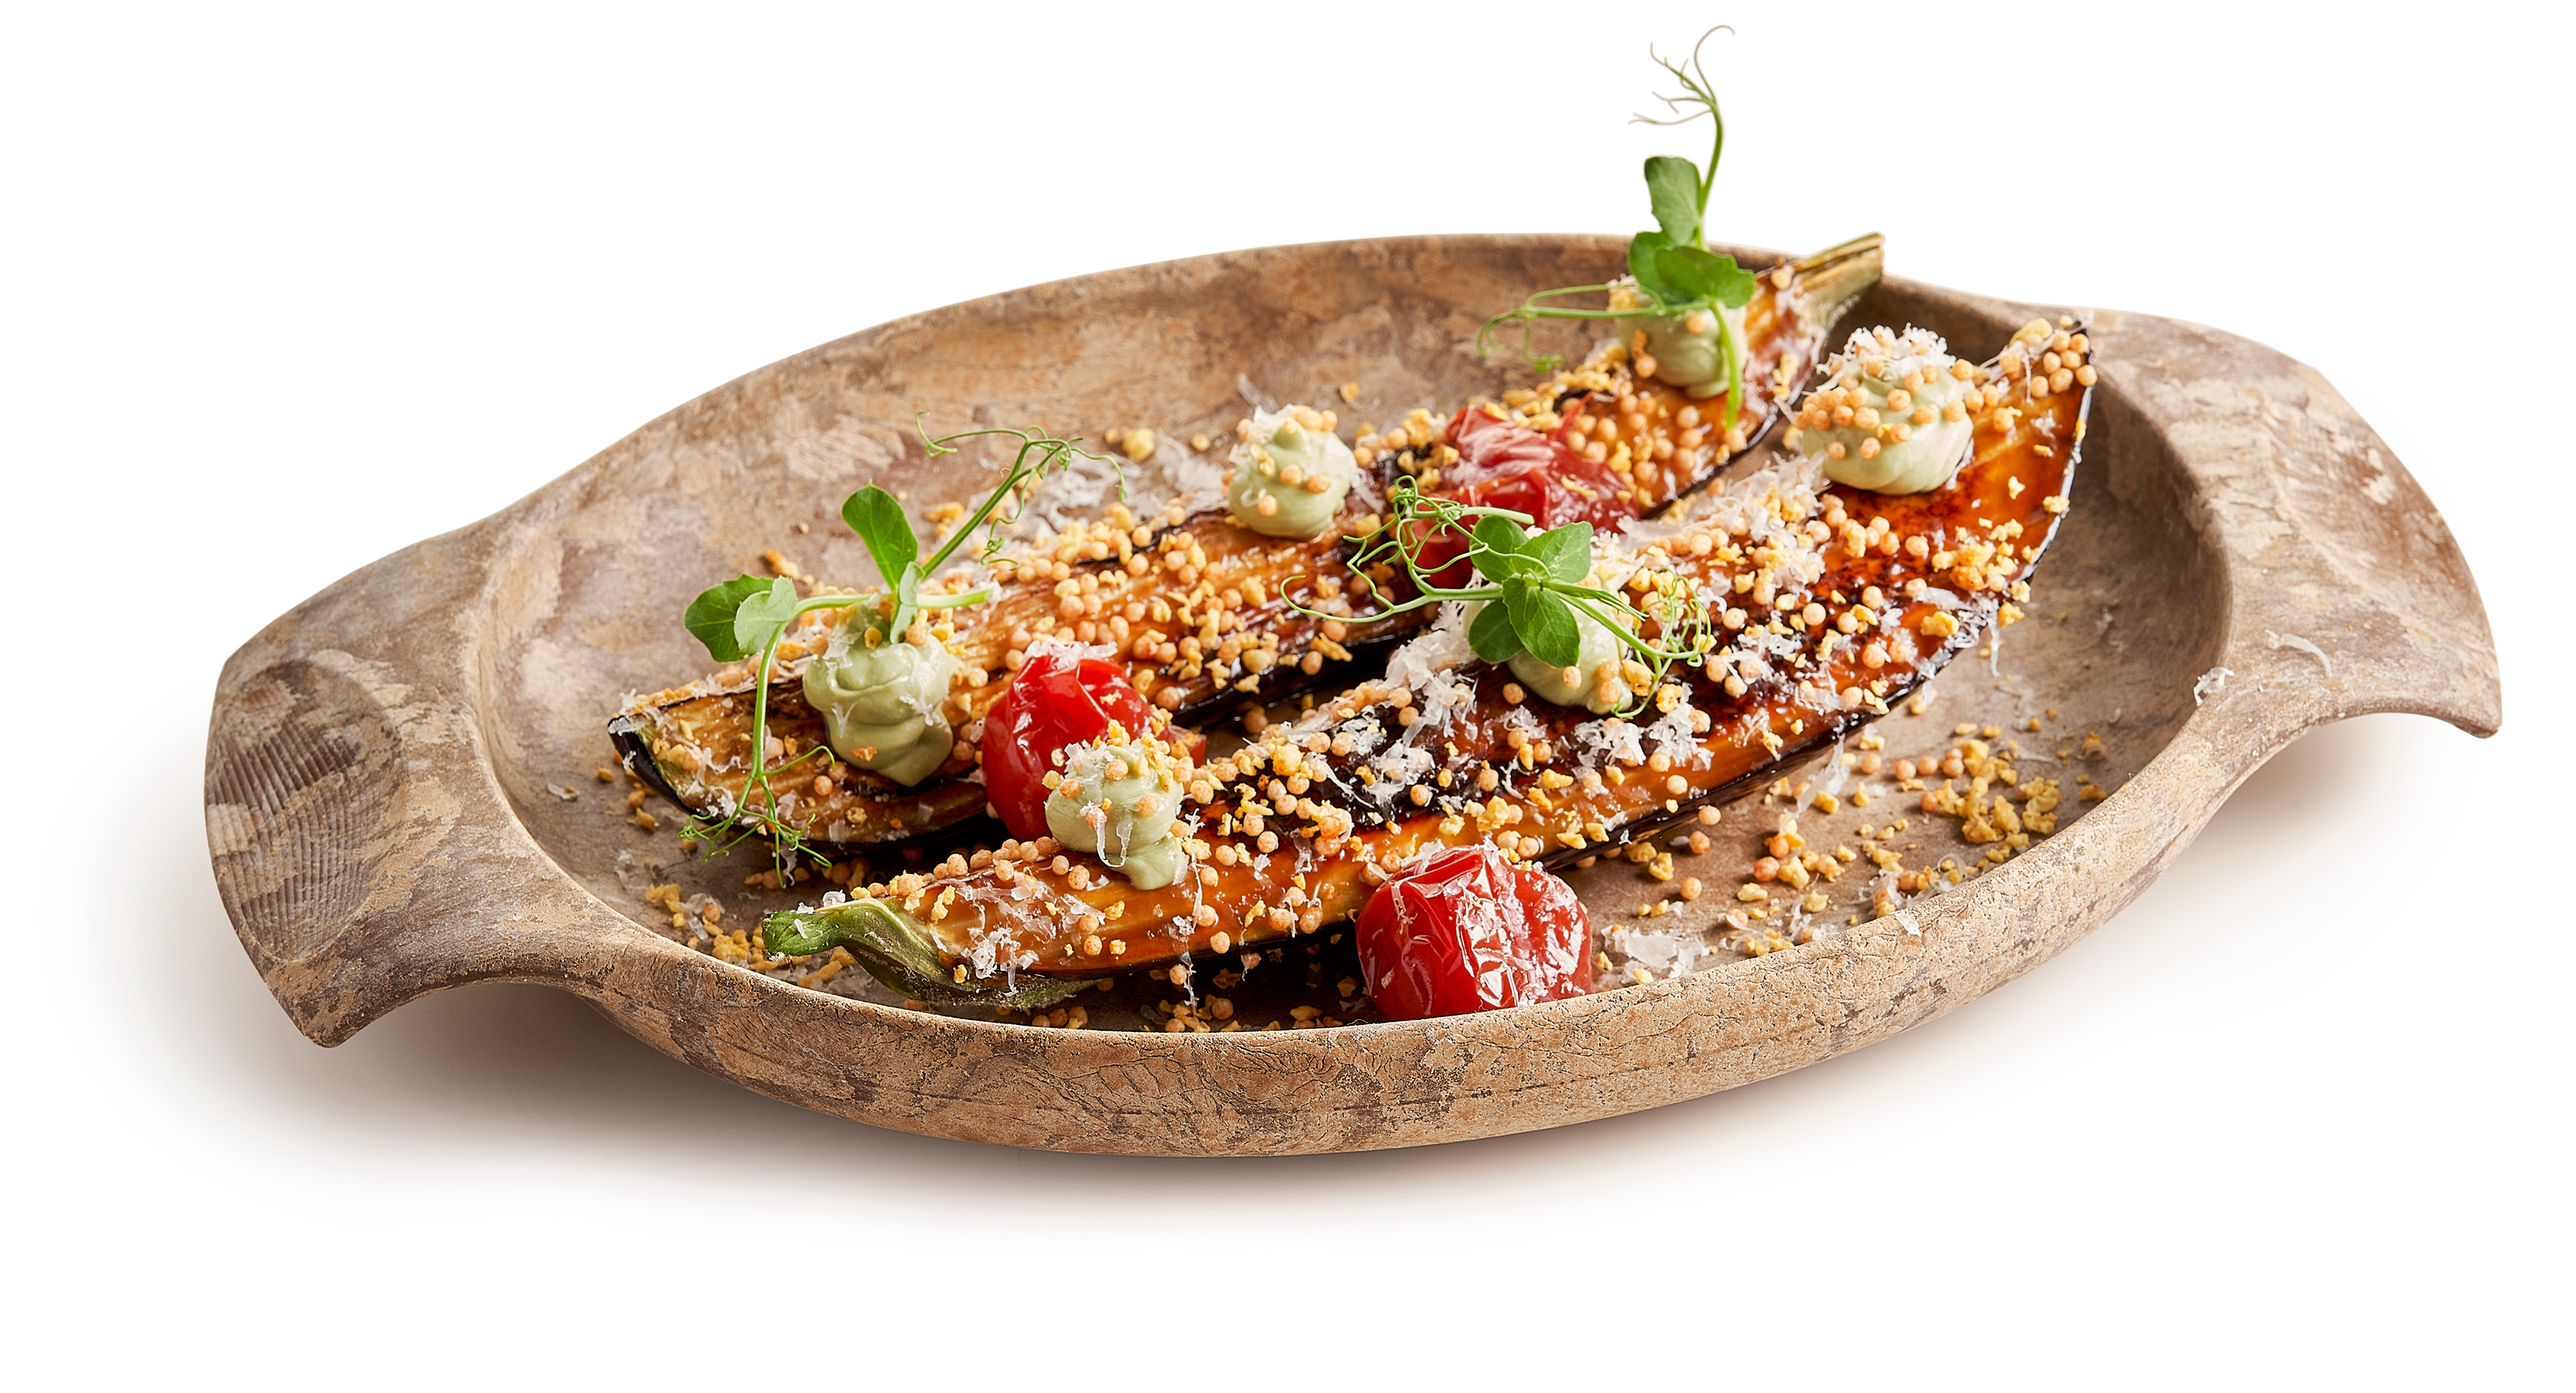 Lacquered aubergine with Rice Crispies and Crunchy Grains & Seeds